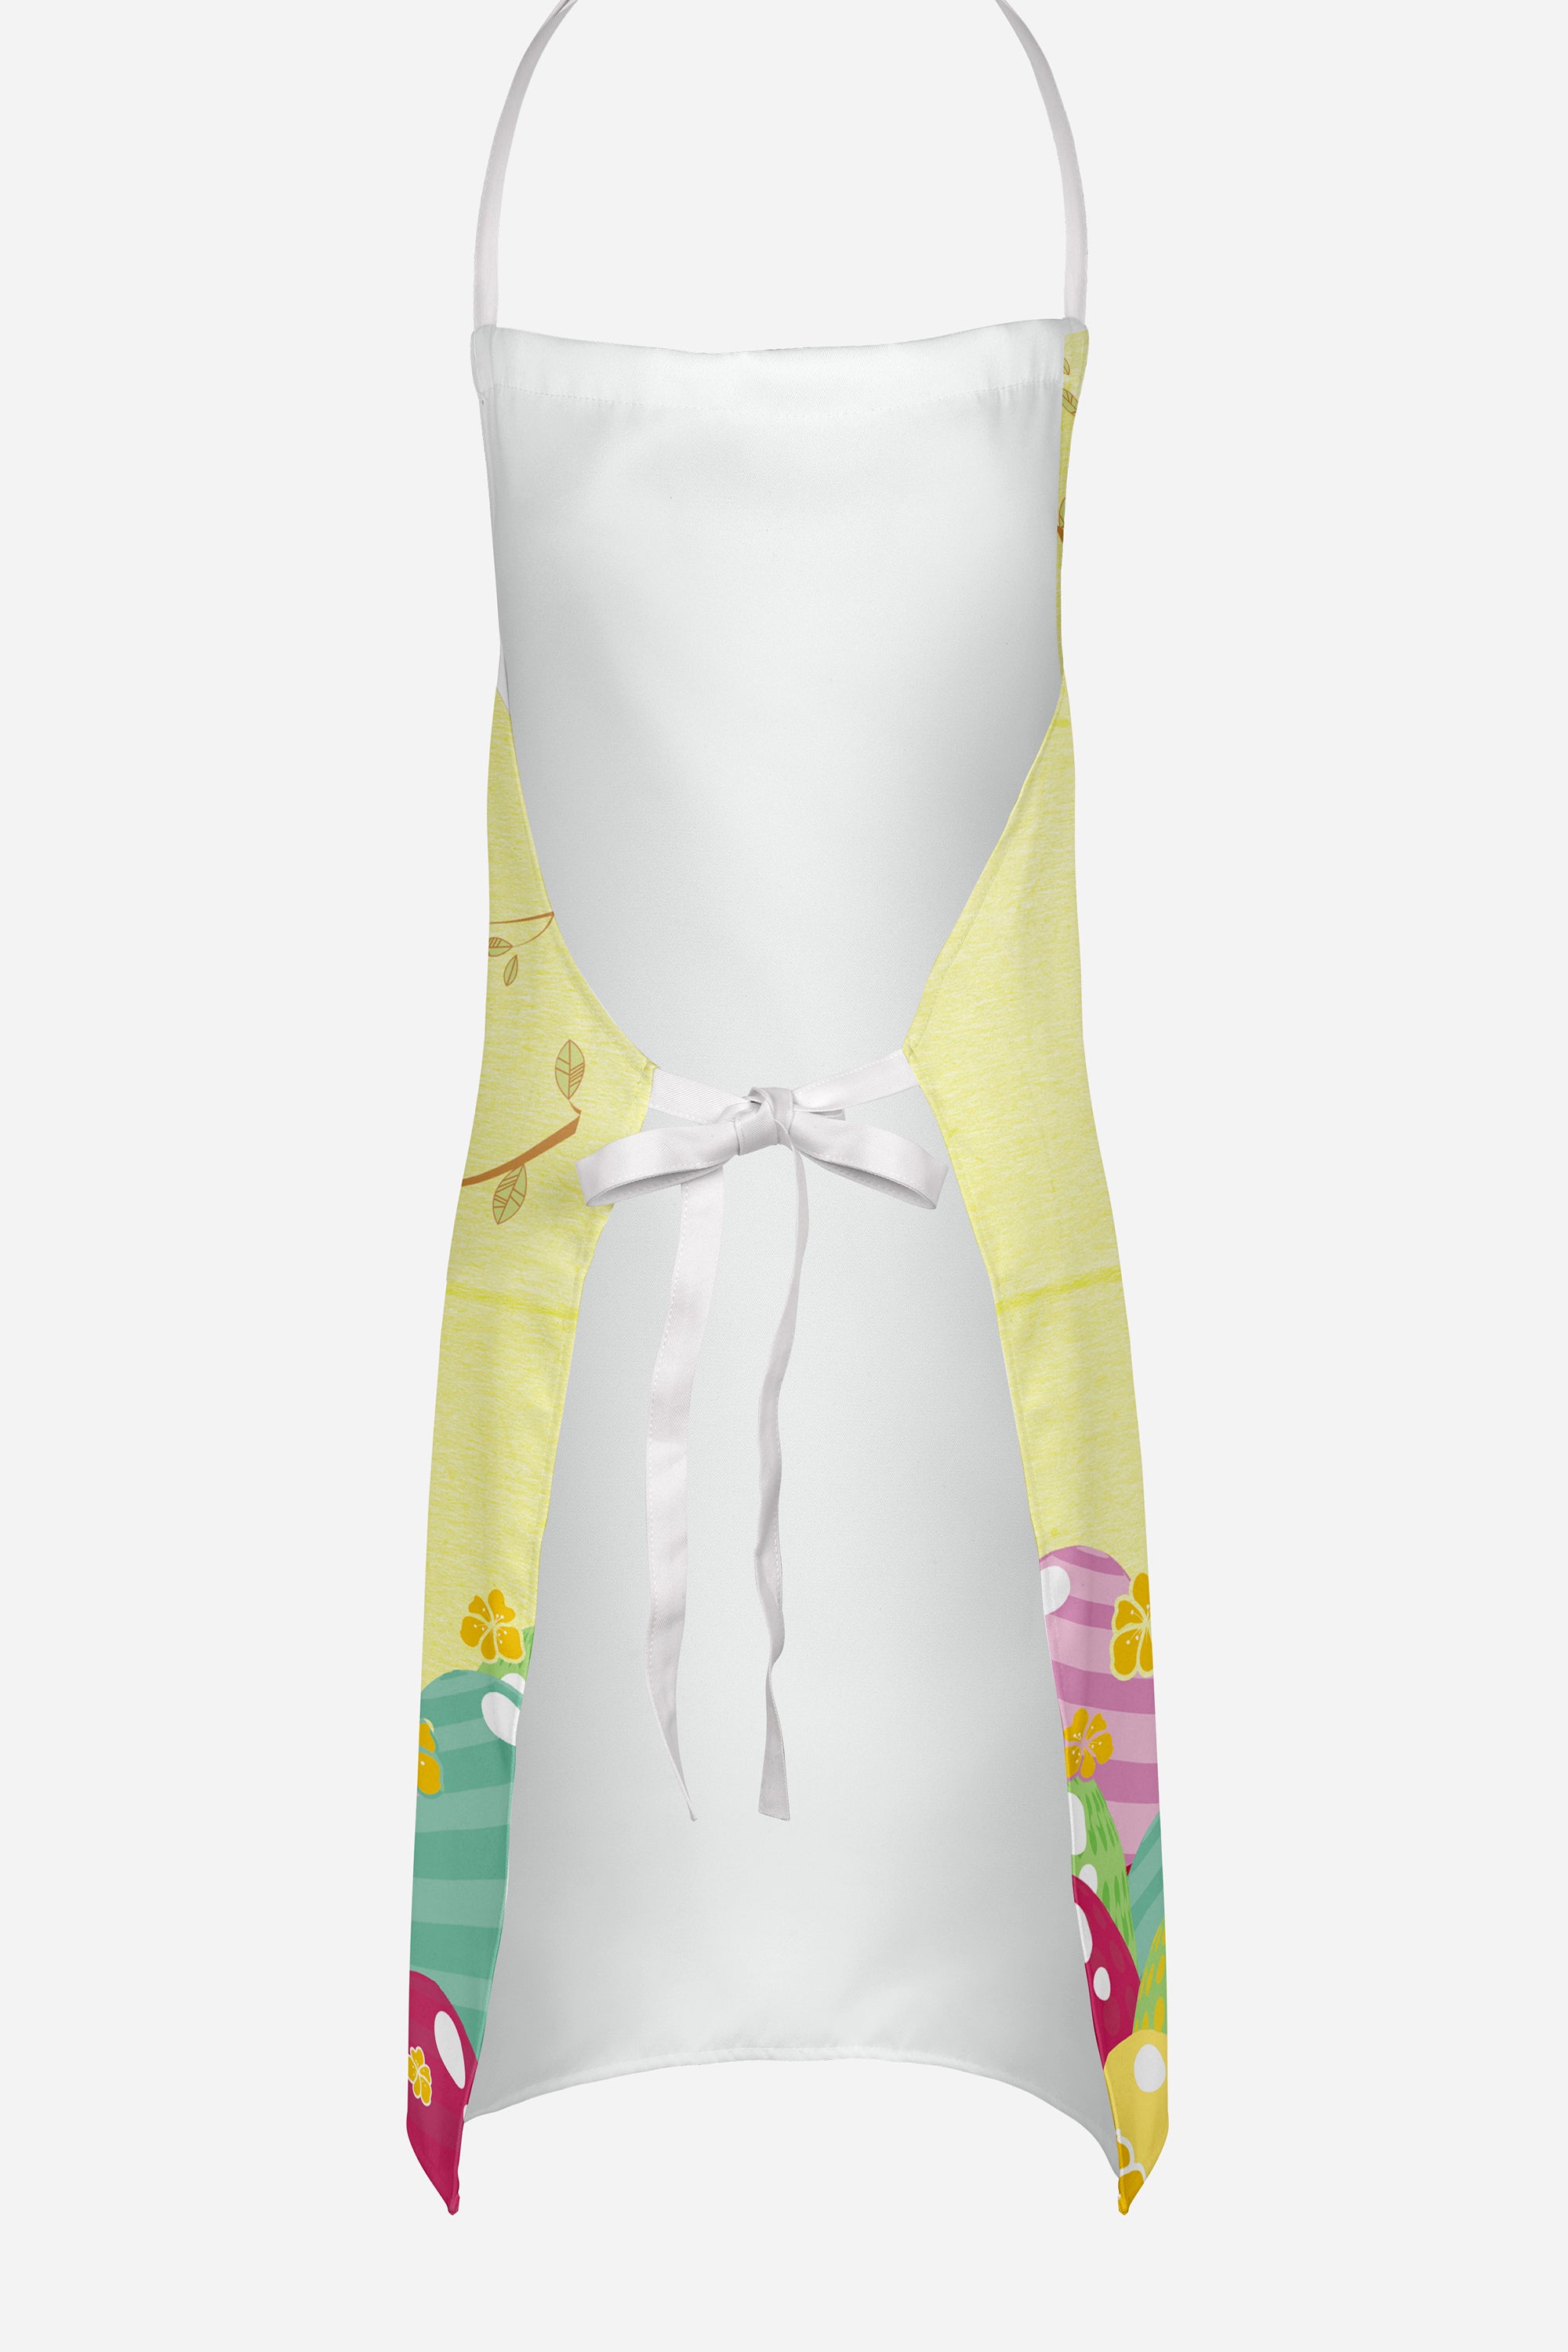 Easter Eggs Jack Russell Terrier Apron BB6108APRON